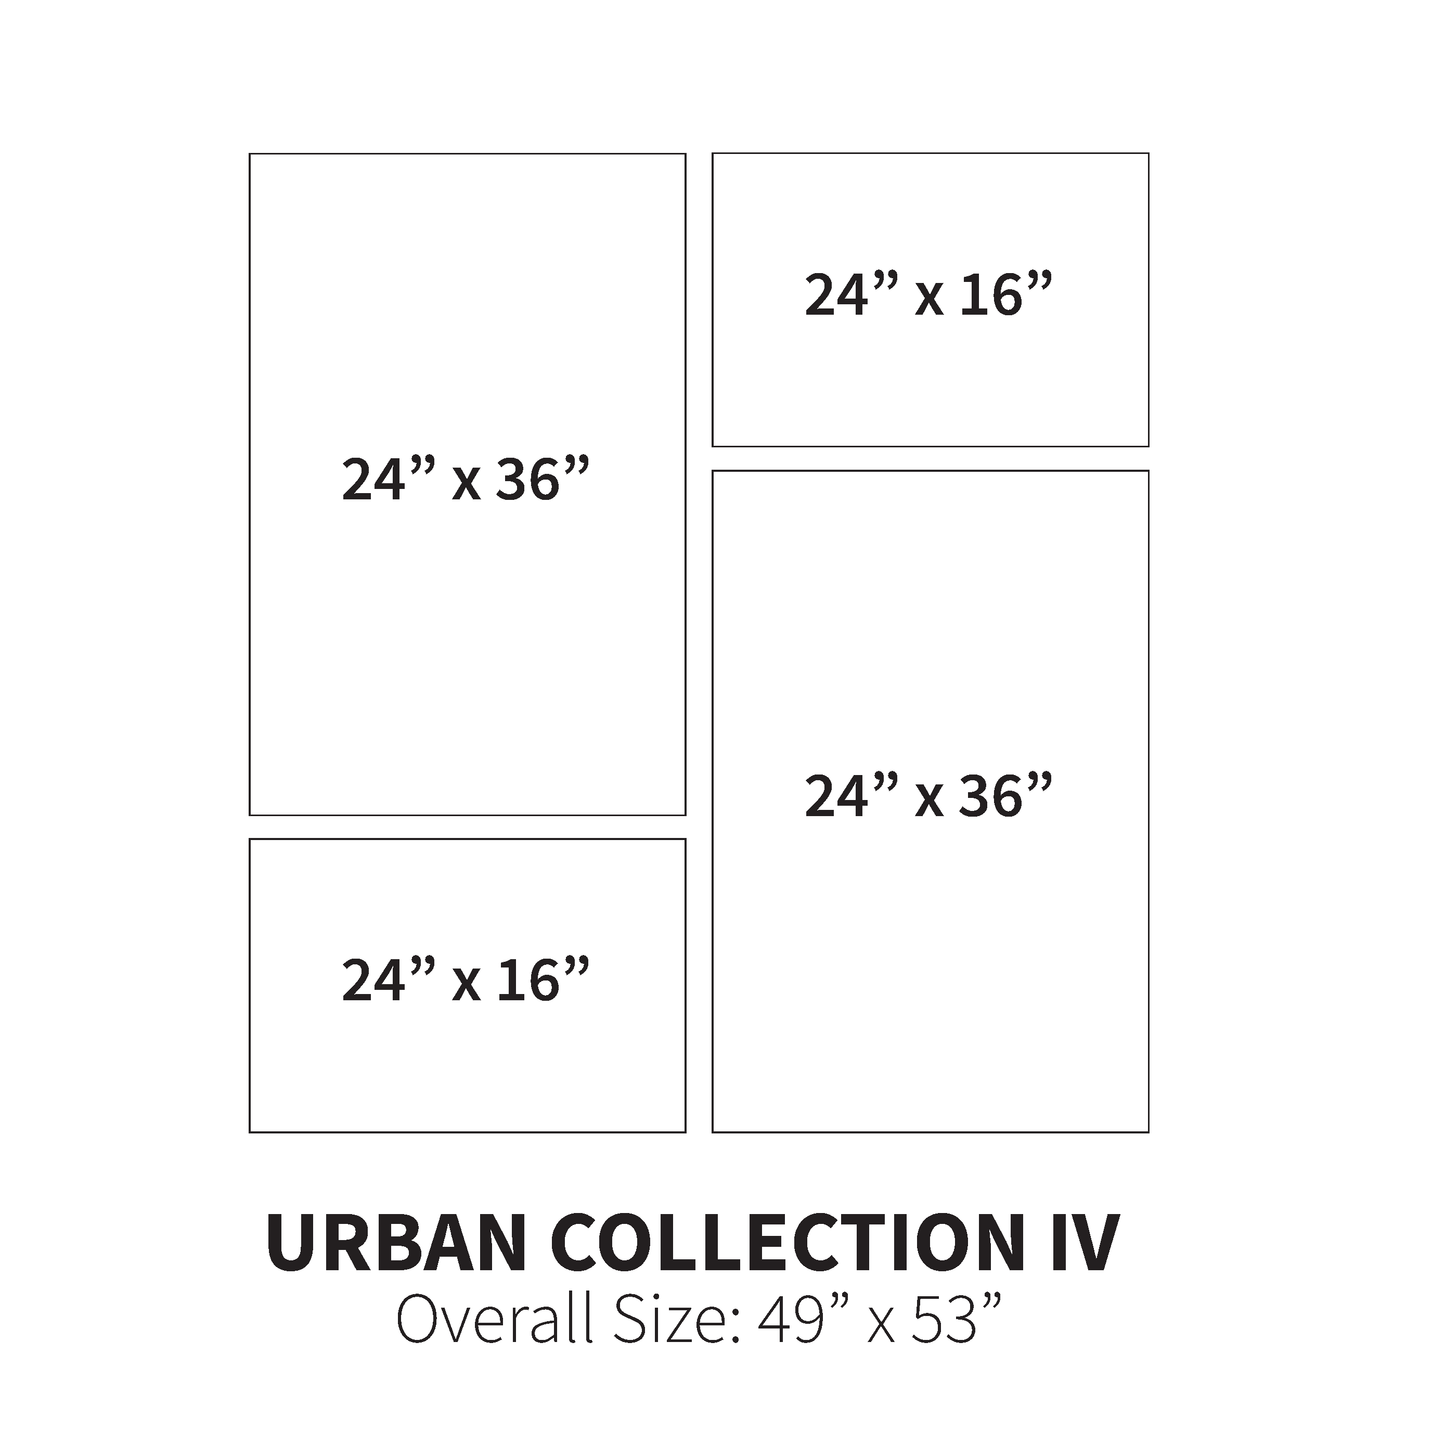 Urban Collection IV (Overall Size: 49" x 53")